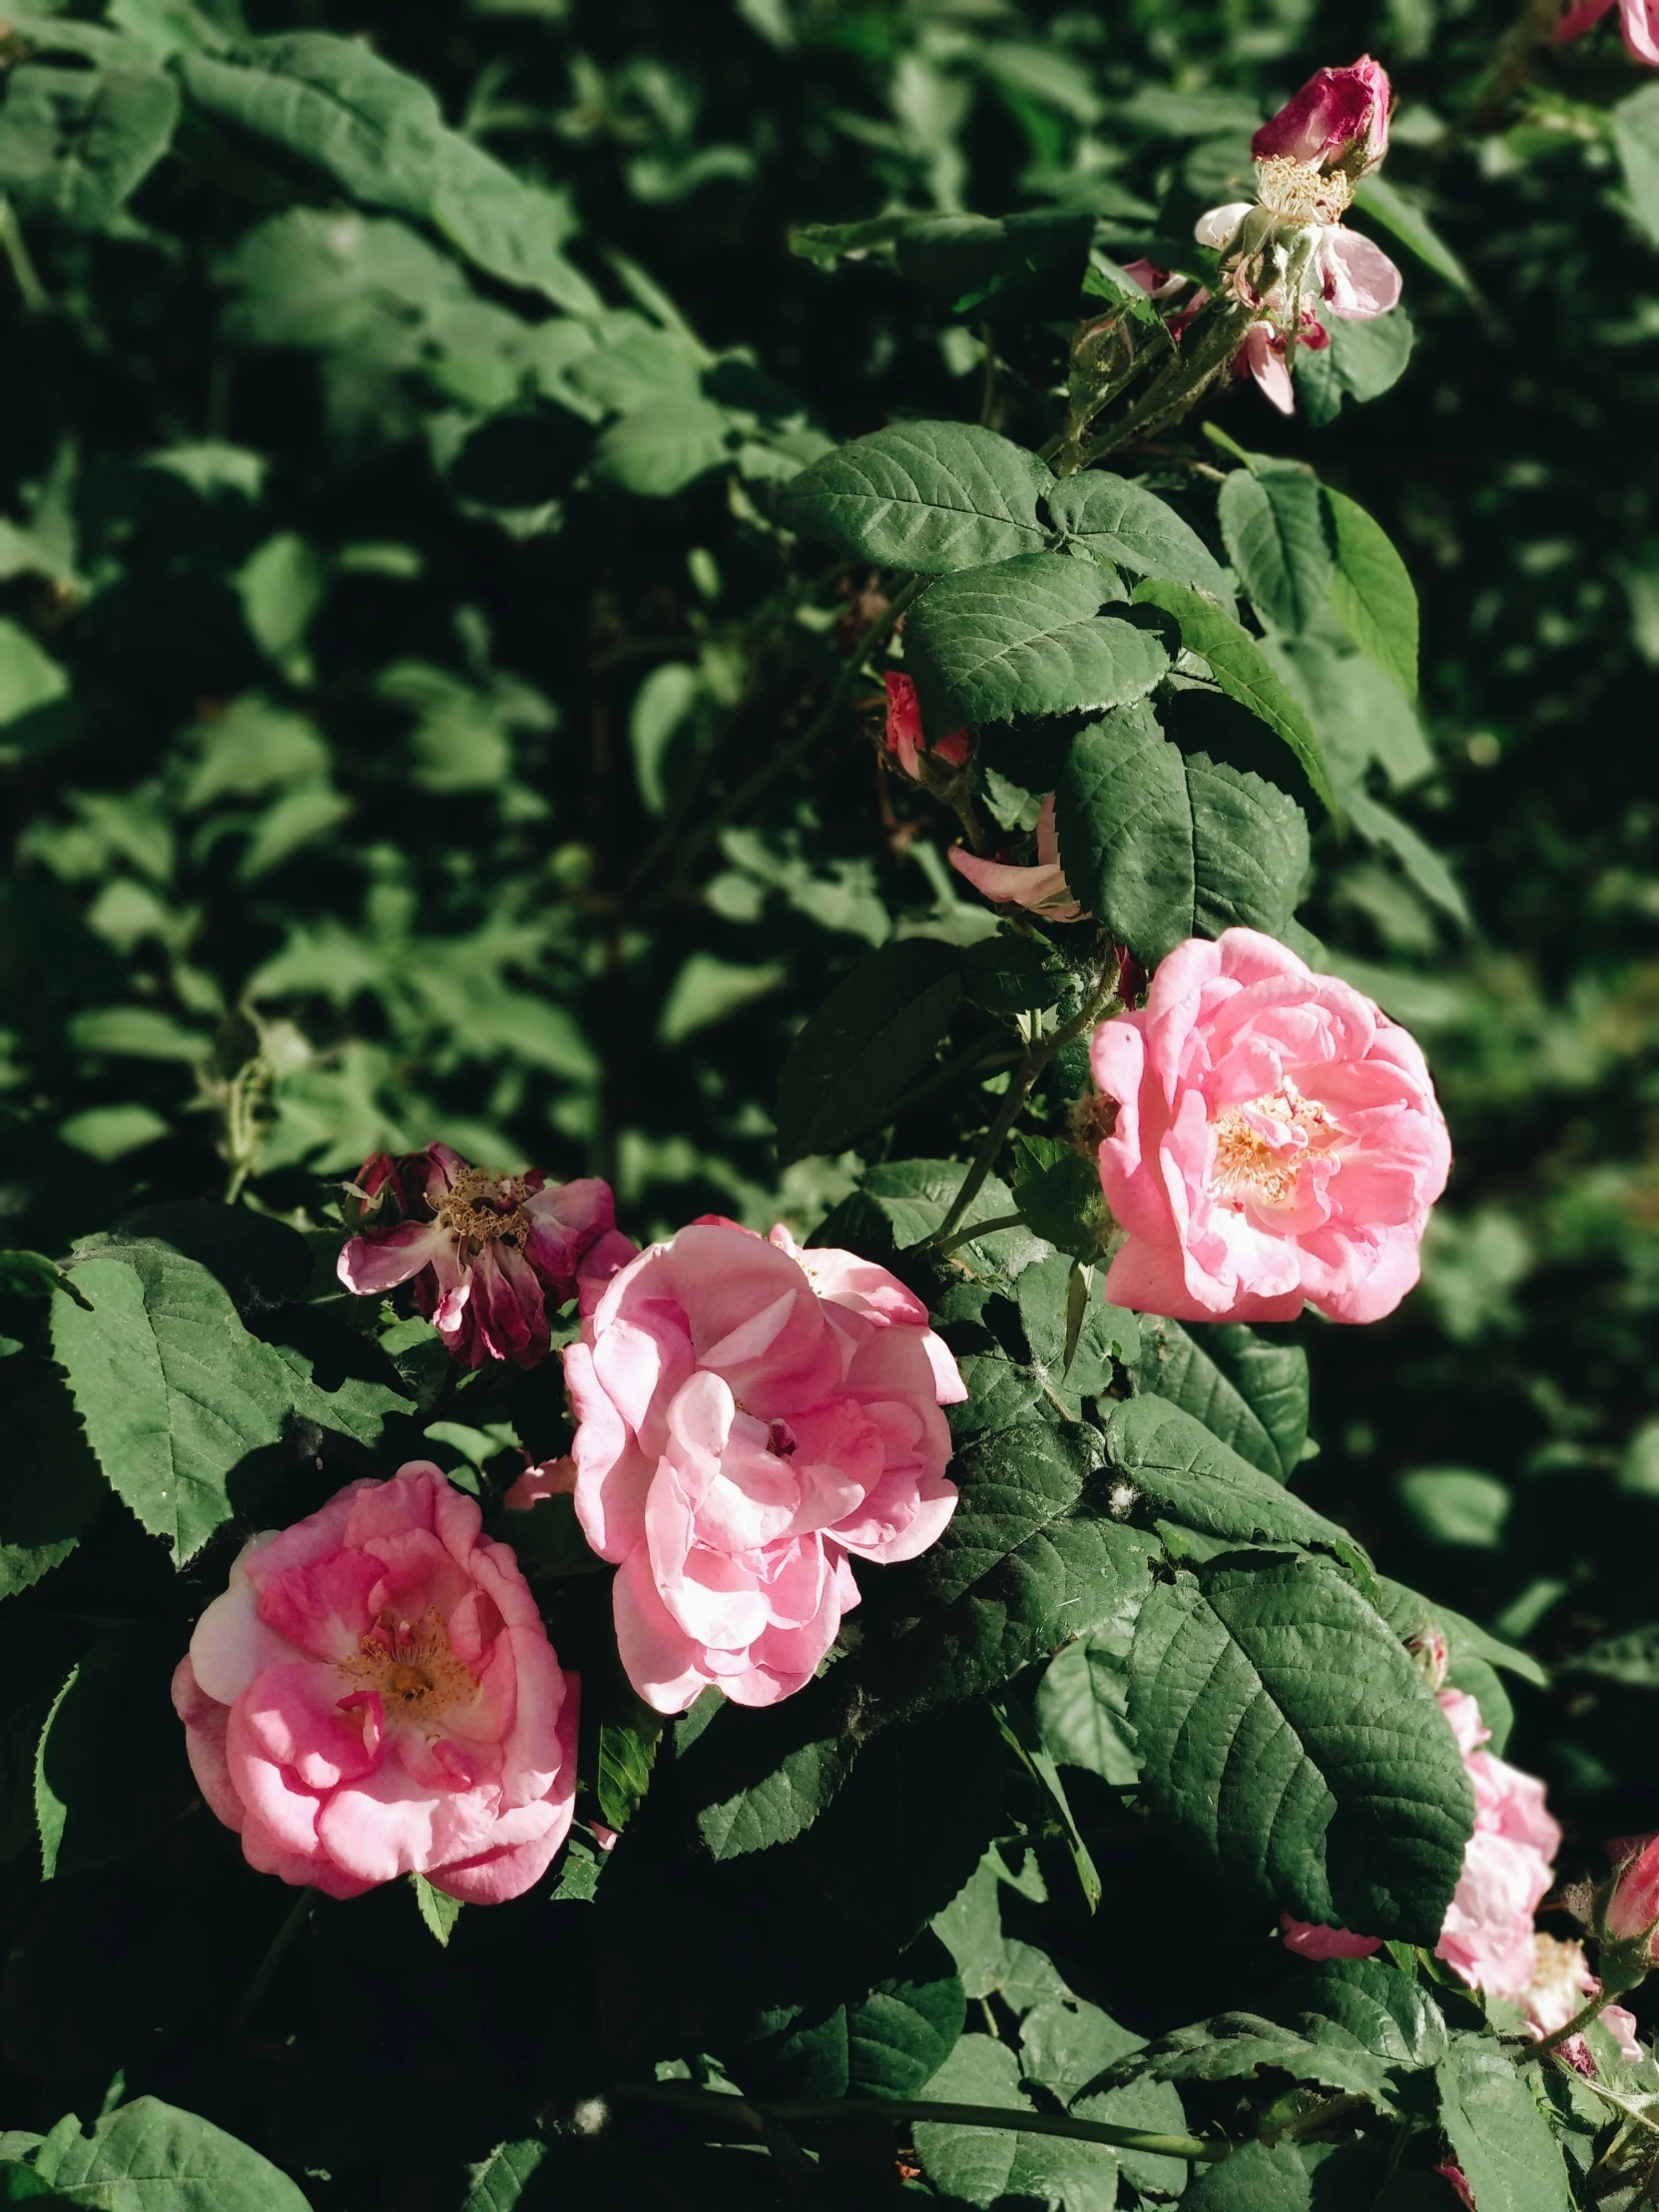 several large, pink roses with green leaves